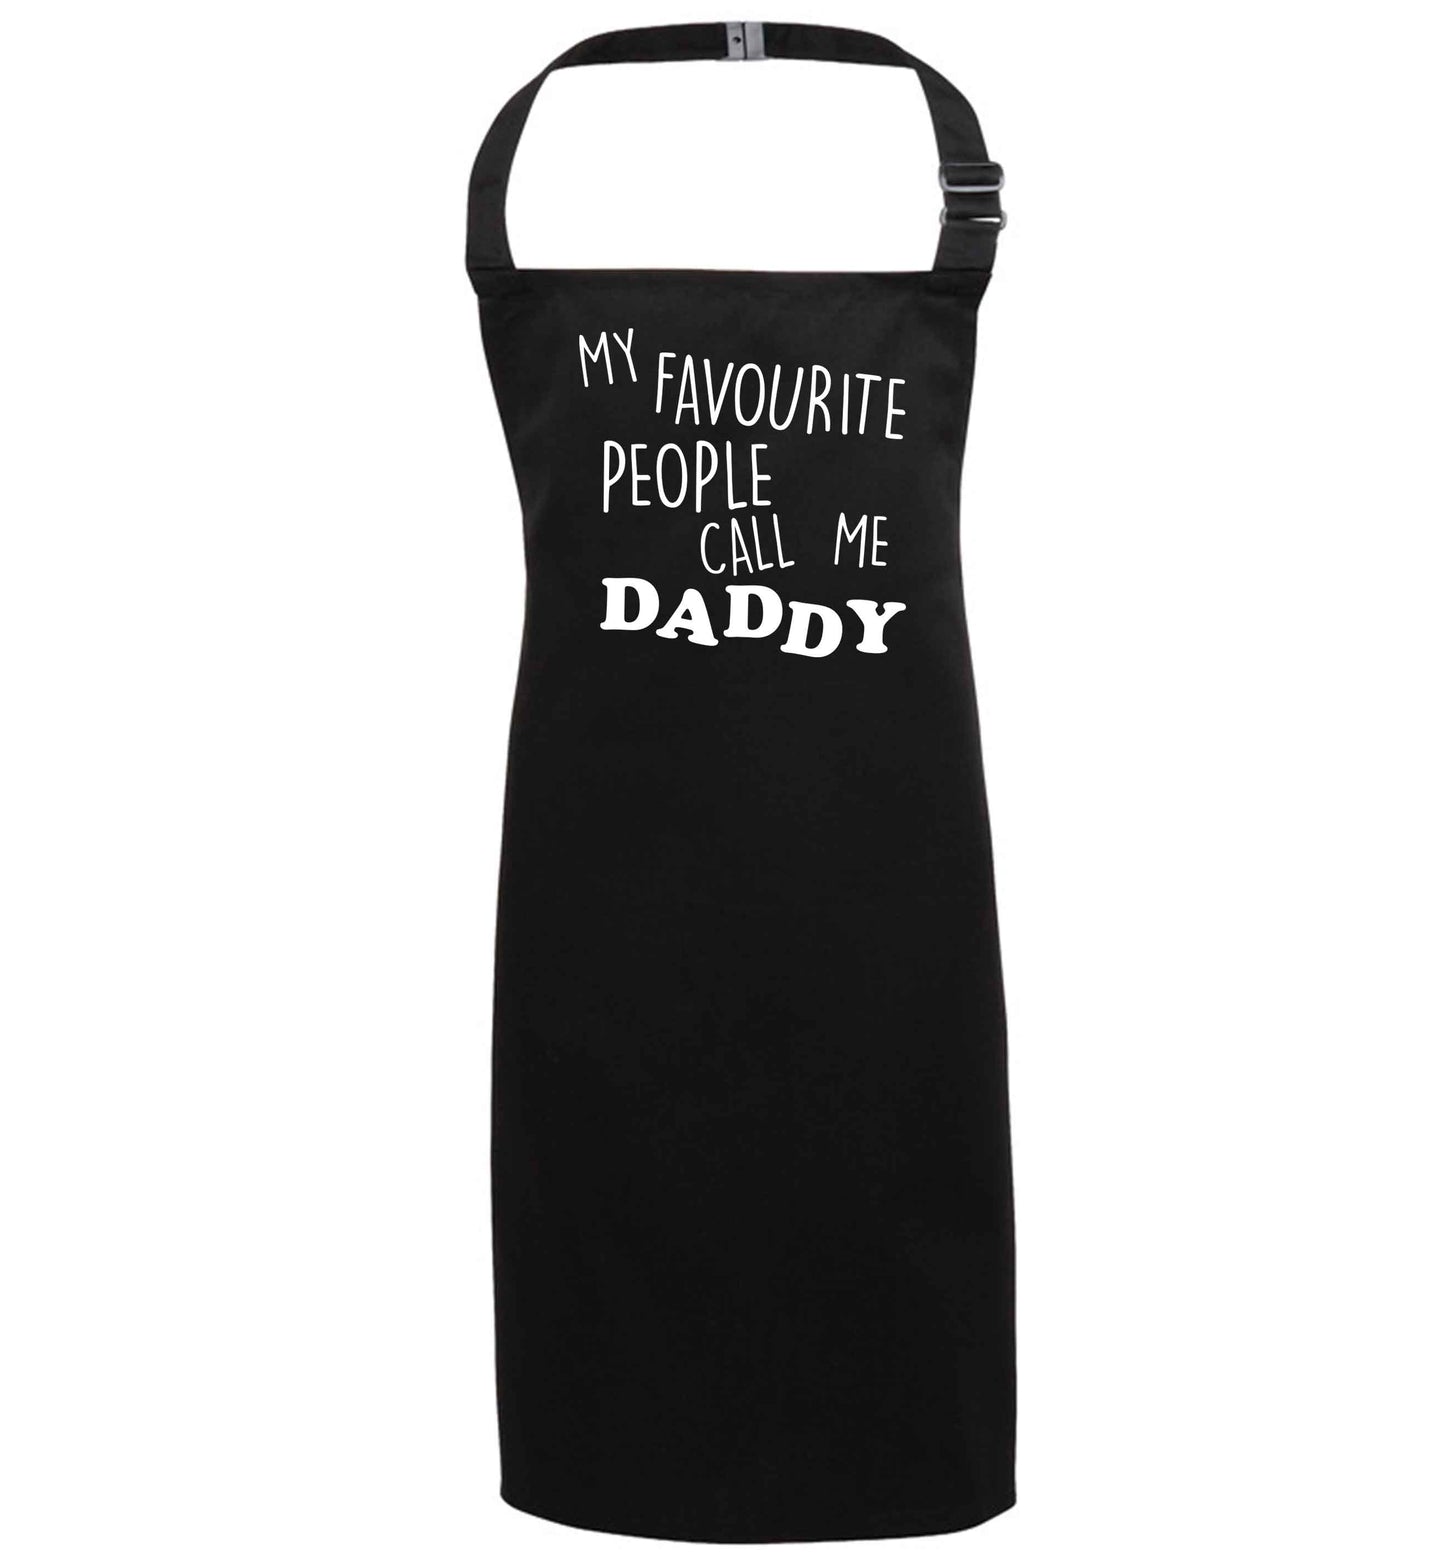 My favourite people call me daddy black apron 7-10 years